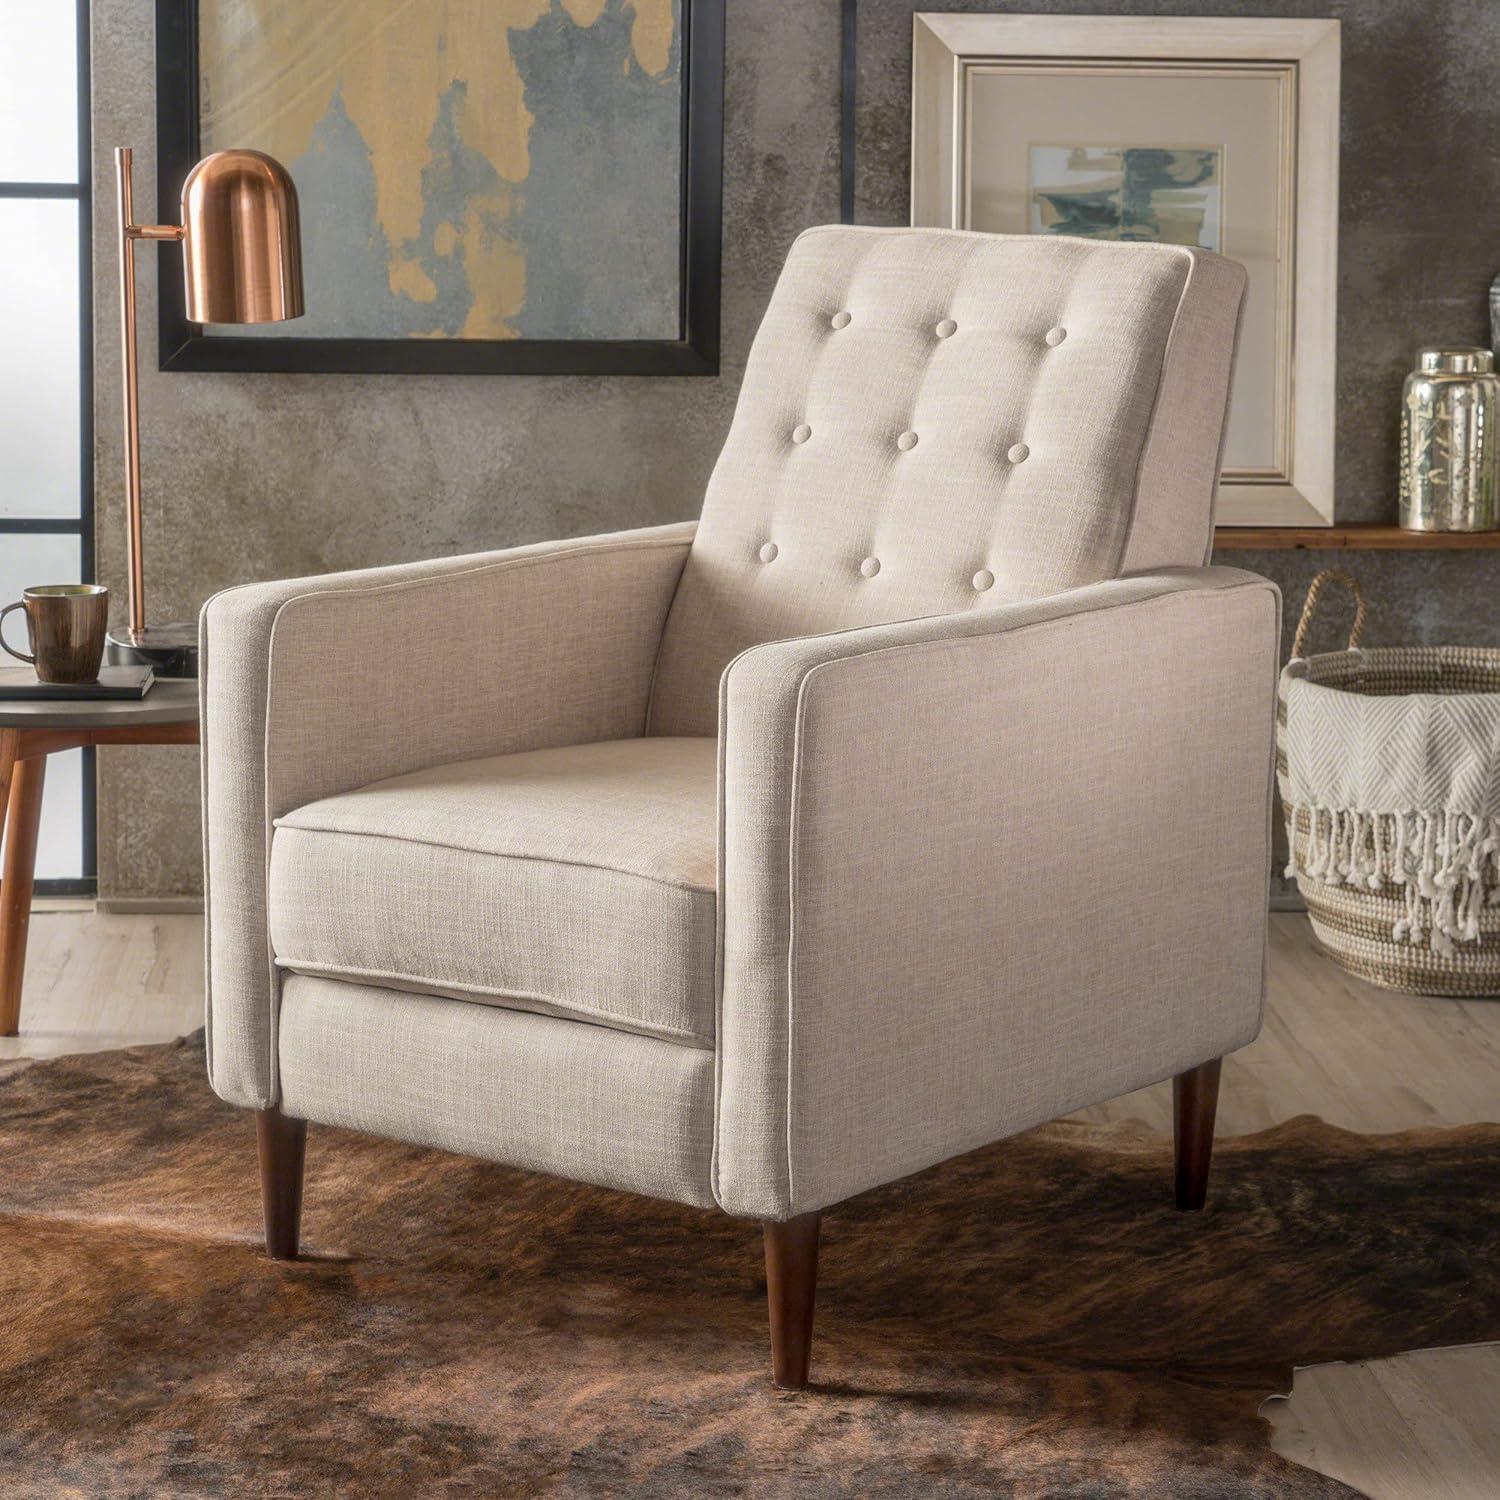 Cream Floral Mid-Century Modern Tufted Fabric Recliner